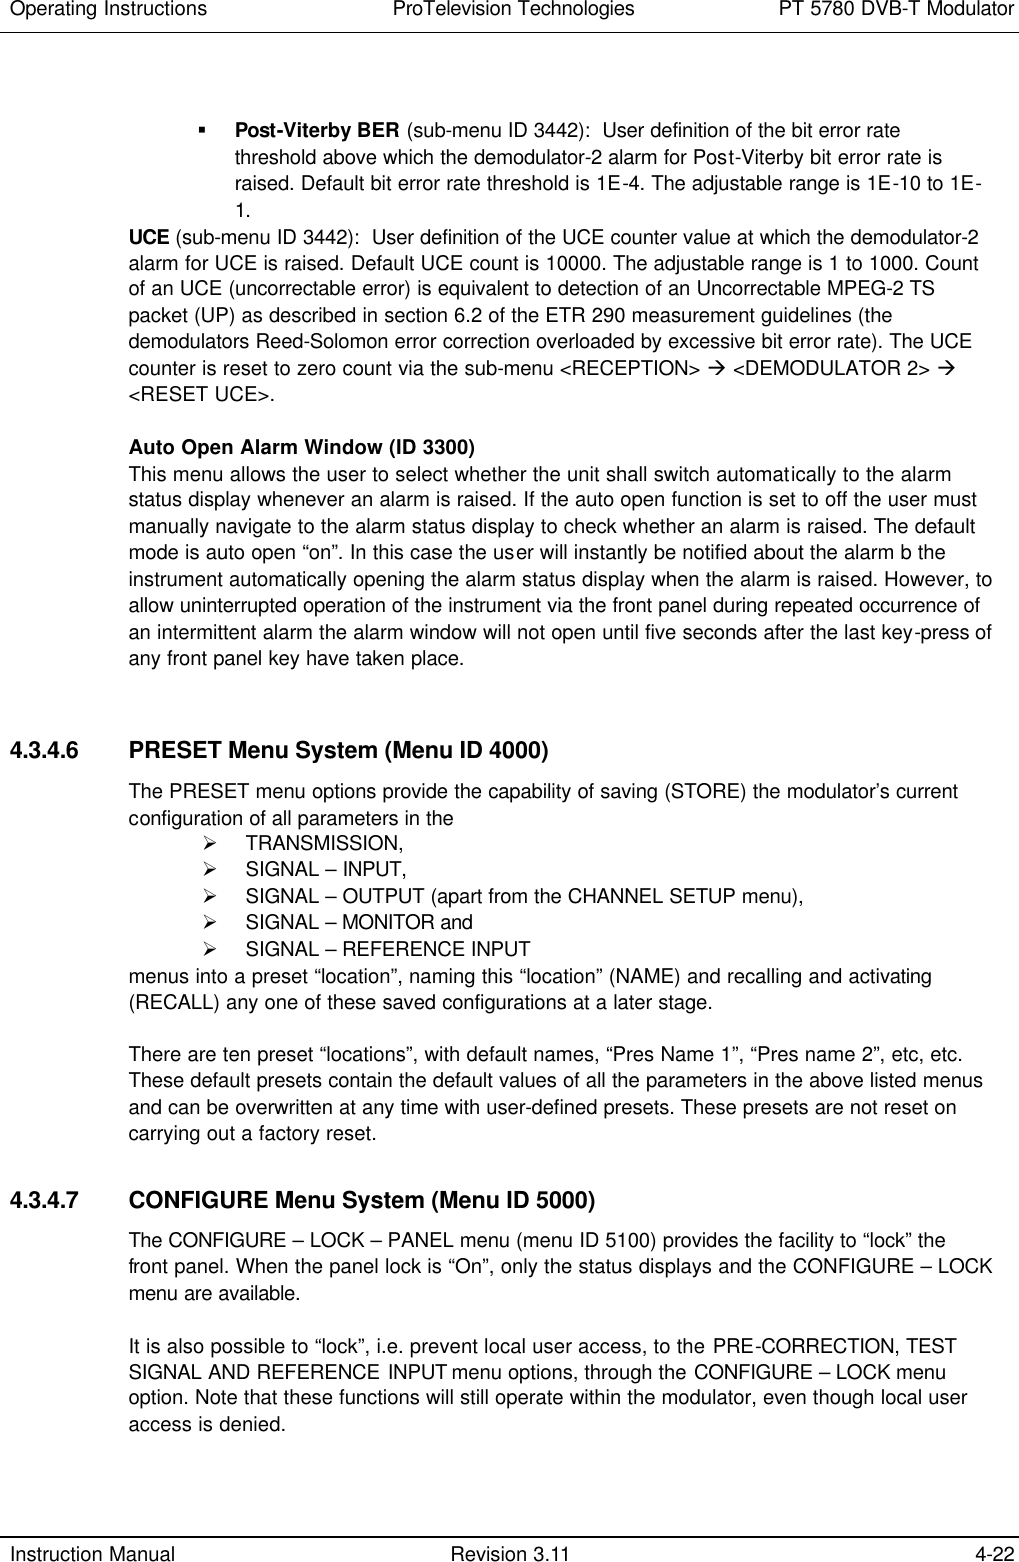 Operating Instructions  ProTelevision Technologies PT 5780 DVB-T Modulator  Instruction Manual Revision 3.11 4-22   § Post-Viterby BER (sub-menu ID 3442):  User definition of the bit error rate threshold above which the demodulator-2 alarm for Post-Viterby bit error rate is raised. Default bit error rate threshold is 1E-4. The adjustable range is 1E-10 to 1E-1. UCE (sub-menu ID 3442):  User definition of the UCE counter value at which the demodulator-2 alarm for UCE is raised. Default UCE count is 10000. The adjustable range is 1 to 1000. Count of an UCE (uncorrectable error) is equivalent to detection of an Uncorrectable MPEG-2 TS packet (UP) as described in section 6.2 of the ETR 290 measurement guidelines (the demodulators Reed-Solomon error correction overloaded by excessive bit error rate). The UCE counter is reset to zero count via the sub-menu &lt;RECEPTION&gt; à &lt;DEMODULATOR 2&gt; à &lt;RESET UCE&gt;.  Auto Open Alarm Window (ID 3300) This menu allows the user to select whether the unit shall switch automatically to the alarm status display whenever an alarm is raised. If the auto open function is set to off the user must manually navigate to the alarm status display to check whether an alarm is raised. The default mode is auto open “on”. In this case the user will instantly be notified about the alarm b the instrument automatically opening the alarm status display when the alarm is raised. However, to allow uninterrupted operation of the instrument via the front panel during repeated occurrence of an intermittent alarm the alarm window will not open until five seconds after the last key-press of any front panel key have taken place.    4.3.4.6 PRESET Menu System (Menu ID 4000) The PRESET menu options provide the capability of saving (STORE) the modulator’s current configuration of all parameters in the  Ø TRANSMISSION,  Ø SIGNAL – INPUT,  Ø SIGNAL – OUTPUT (apart from the CHANNEL SETUP menu),  Ø SIGNAL – MONITOR and  Ø SIGNAL – REFERENCE INPUT  menus into a preset “location”, naming this “location” (NAME) and recalling and activating (RECALL) any one of these saved configurations at a later stage.   There are ten preset “locations”, with default names, “Pres Name 1”, “Pres name 2”, etc, etc. These default presets contain the default values of all the parameters in the above listed menus and can be overwritten at any time with user-defined presets. These presets are not reset on carrying out a factory reset.  4.3.4.7 CONFIGURE Menu System (Menu ID 5000) The CONFIGURE – LOCK – PANEL menu (menu ID 5100) provides the facility to “lock” the front panel. When the panel lock is “On”, only the status displays and the CONFIGURE – LOCK menu are available.  It is also possible to “lock”, i.e. prevent local user access, to the PRE-CORRECTION, TEST SIGNAL AND REFERENCE INPUT menu options, through the CONFIGURE – LOCK menu option. Note that these functions will still operate within the modulator, even though local user access is denied.  